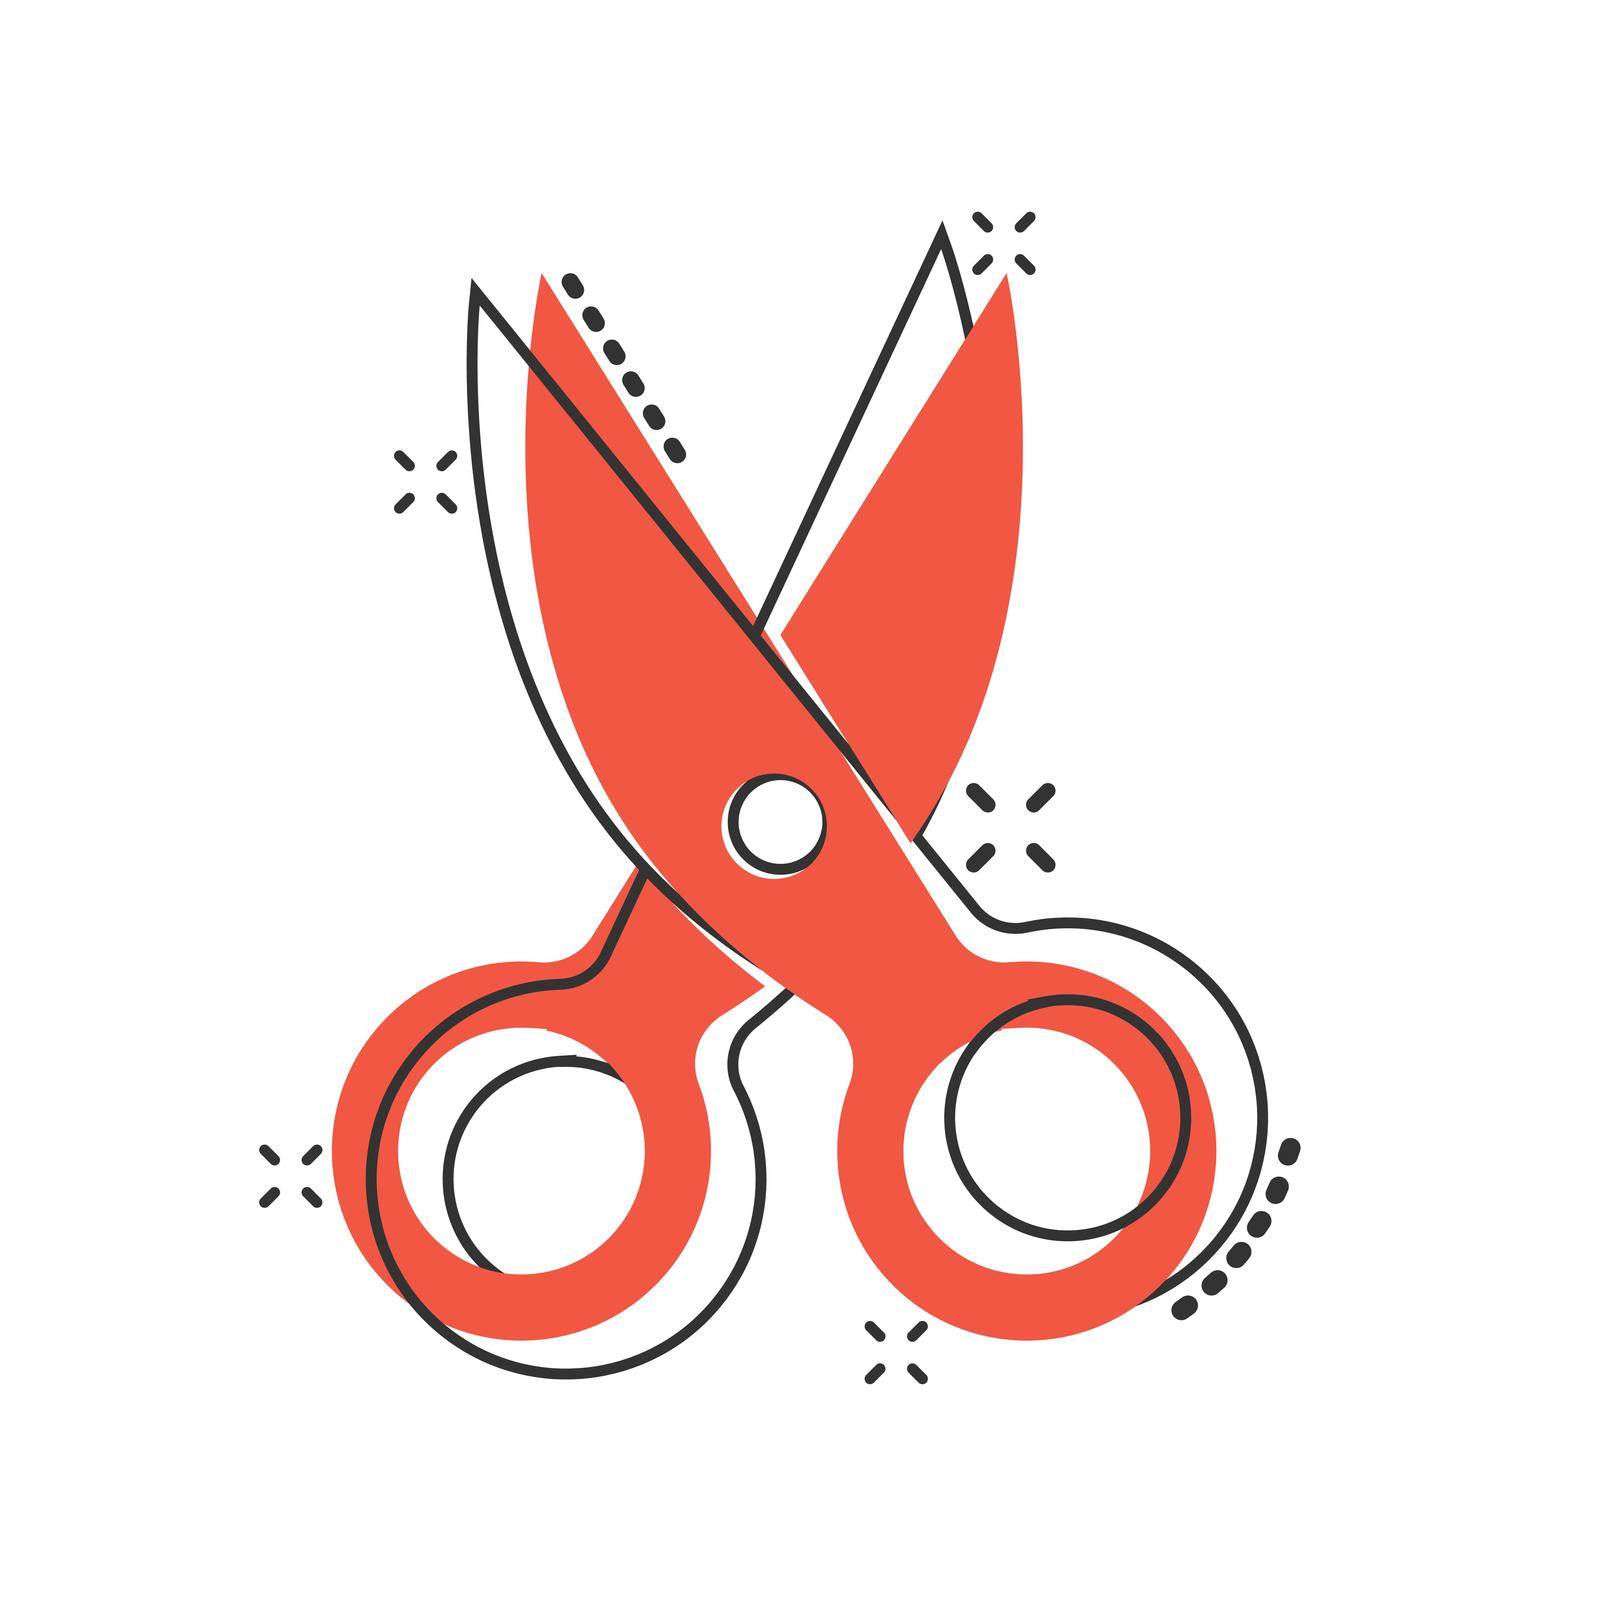 Scissor icon in comic style. Cut equipment cartoon vector illustration on white isolated background. Cutter splash effect business concept. by LysenkoA